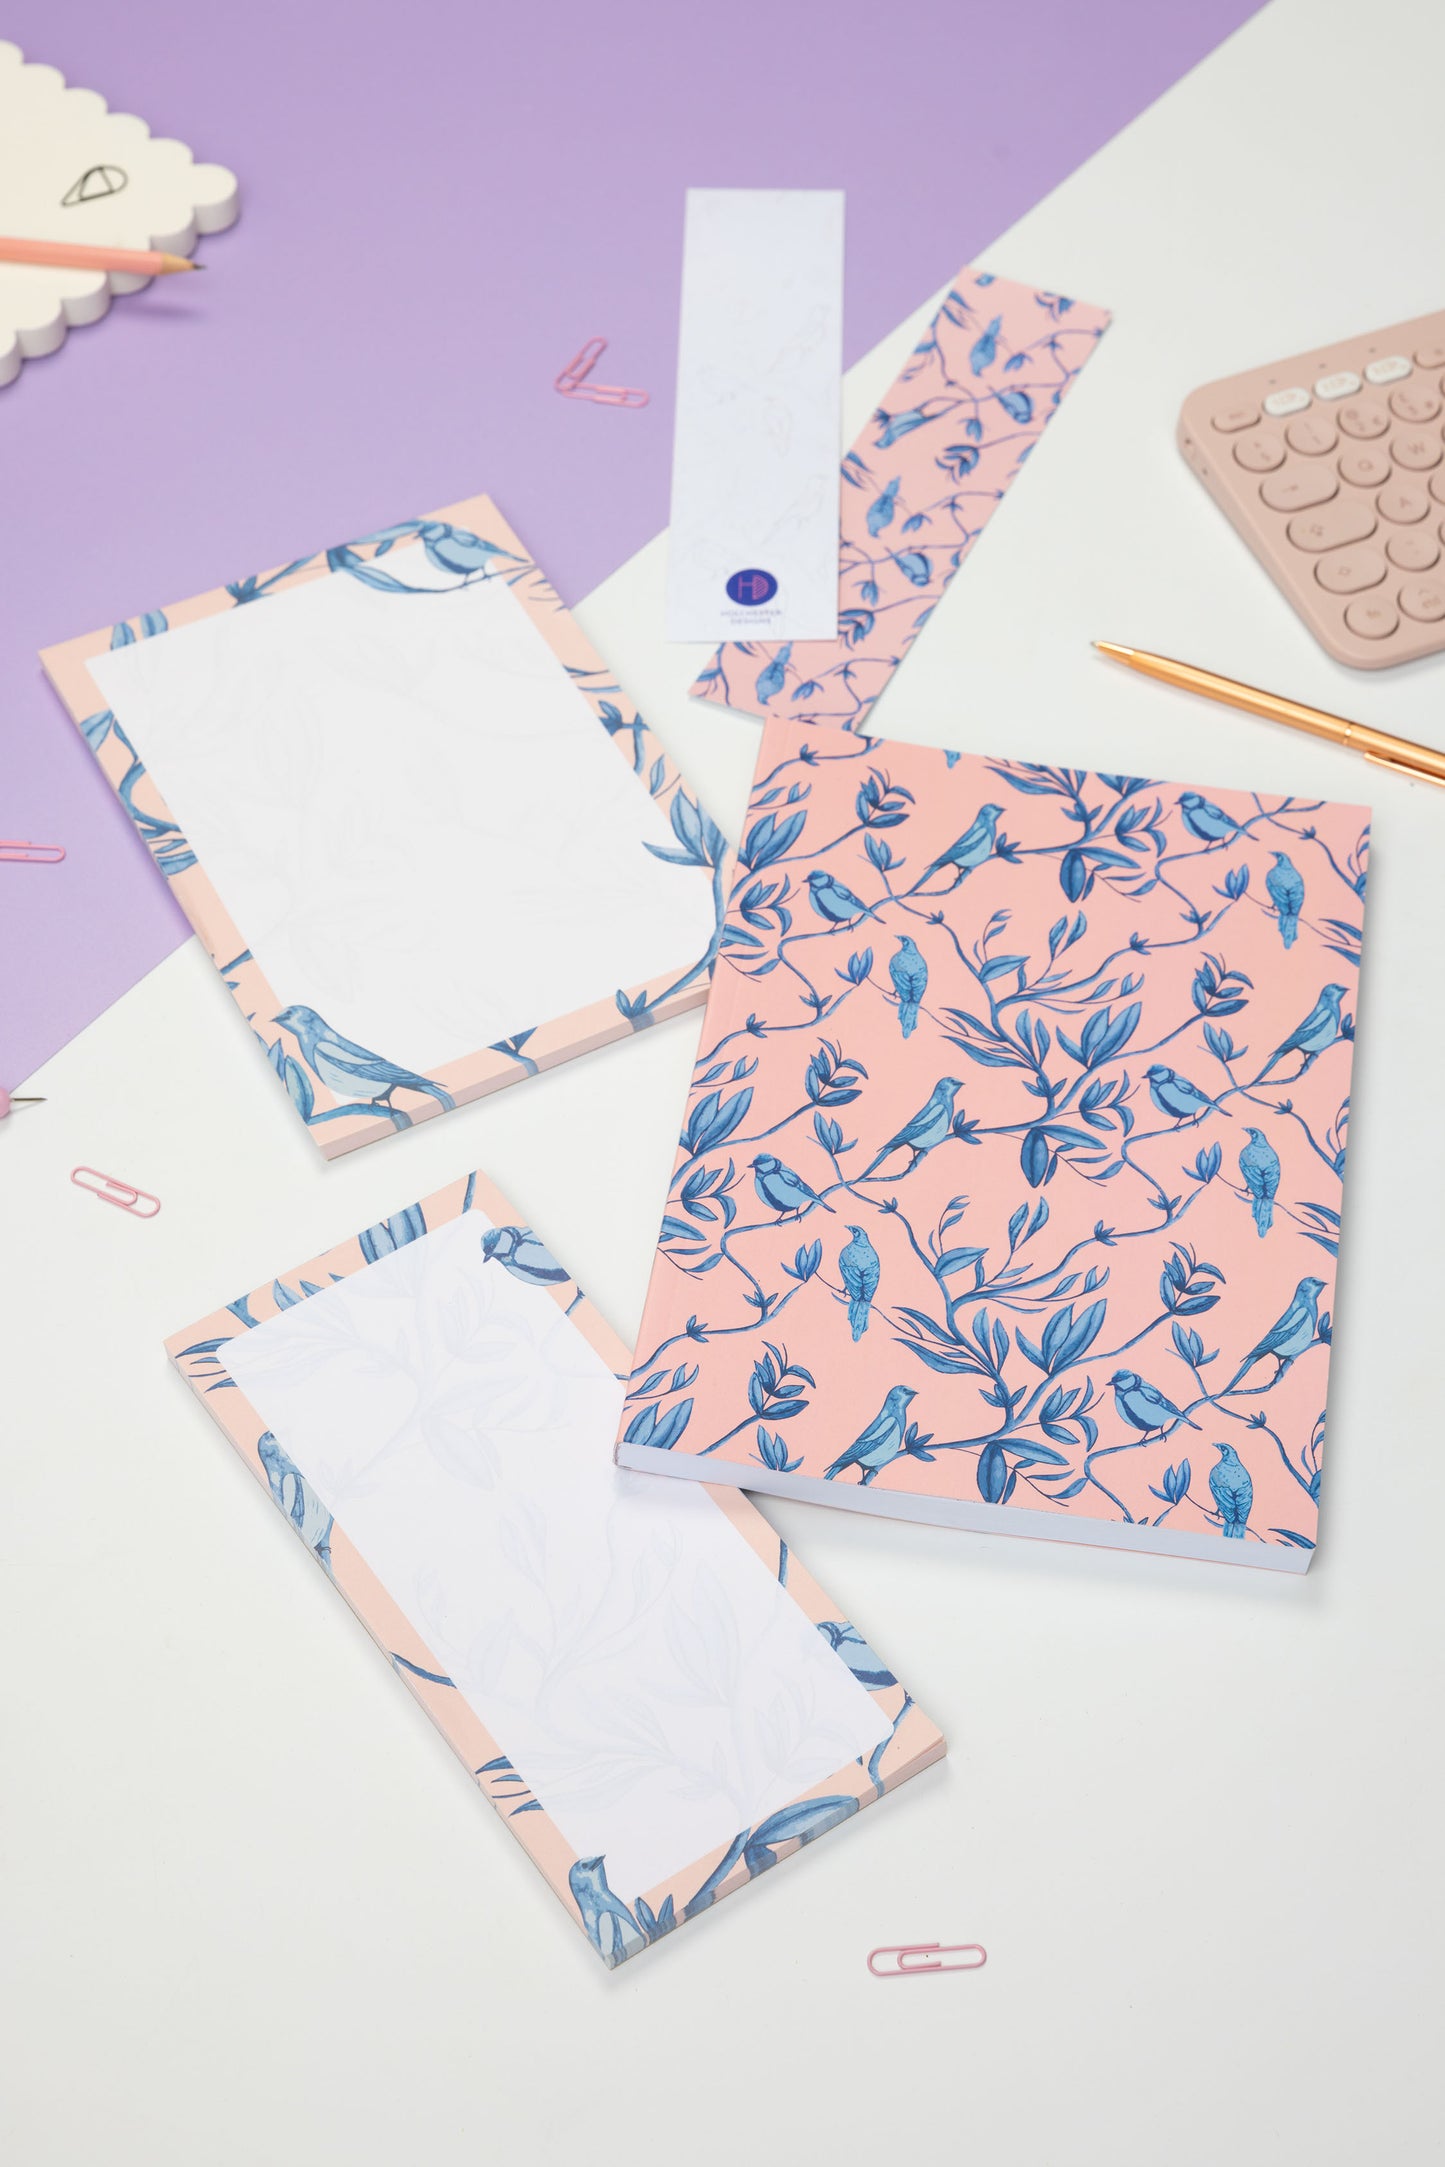 Brighton Birds Full Colleciton - B5 Notebook, List pad, A5 Notepad and 2 double-sided bookmarks (one side up each) - is on a white and lilac desk, with a blush pink keyboard and pink paperclips scattered around them.